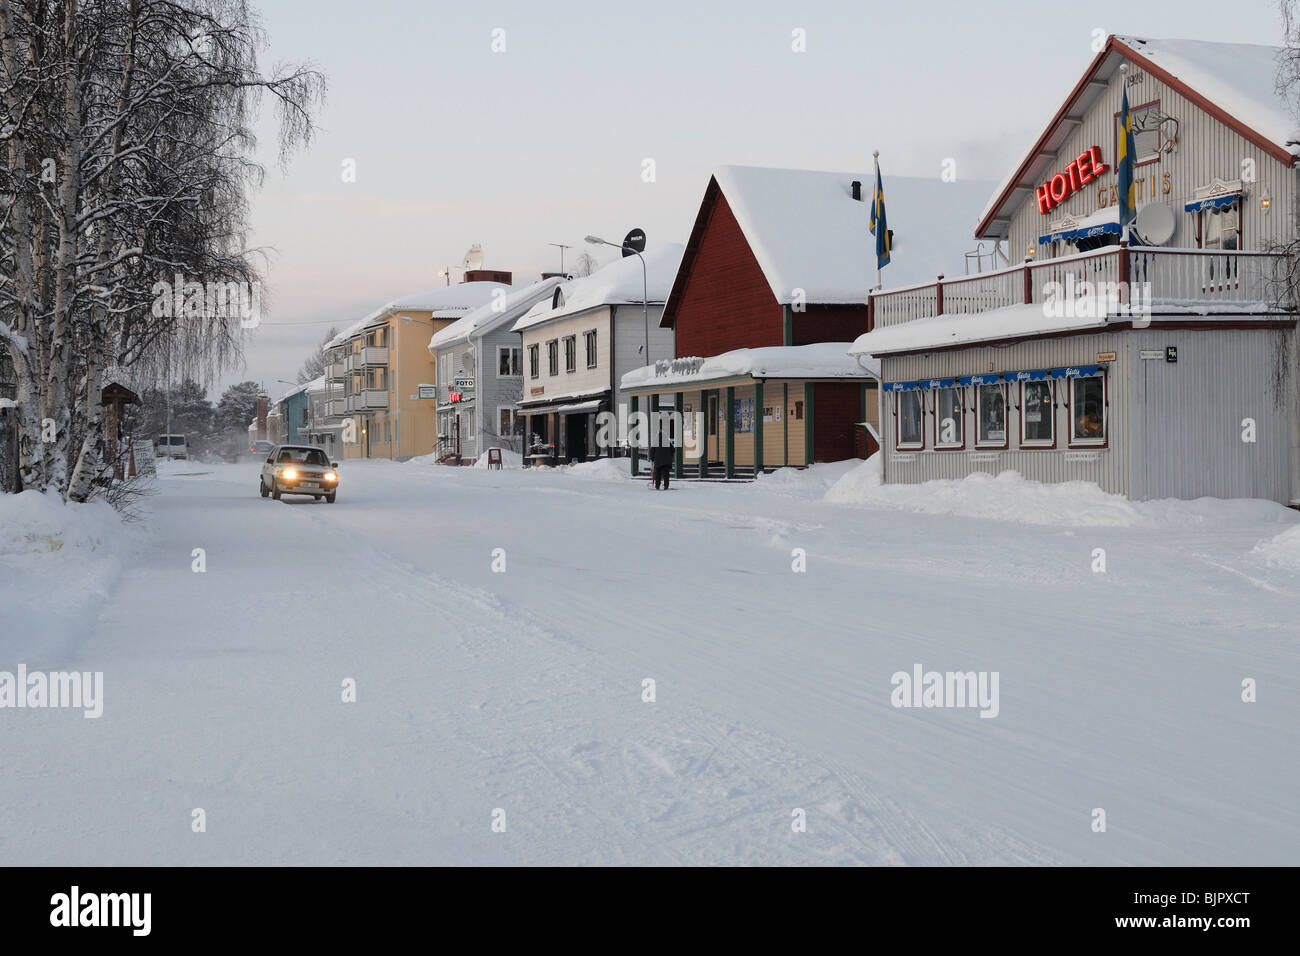 The center of th town Jokkmokk. You can see a hotel and a cinema, both in the old-fashioned style. Stock Photo